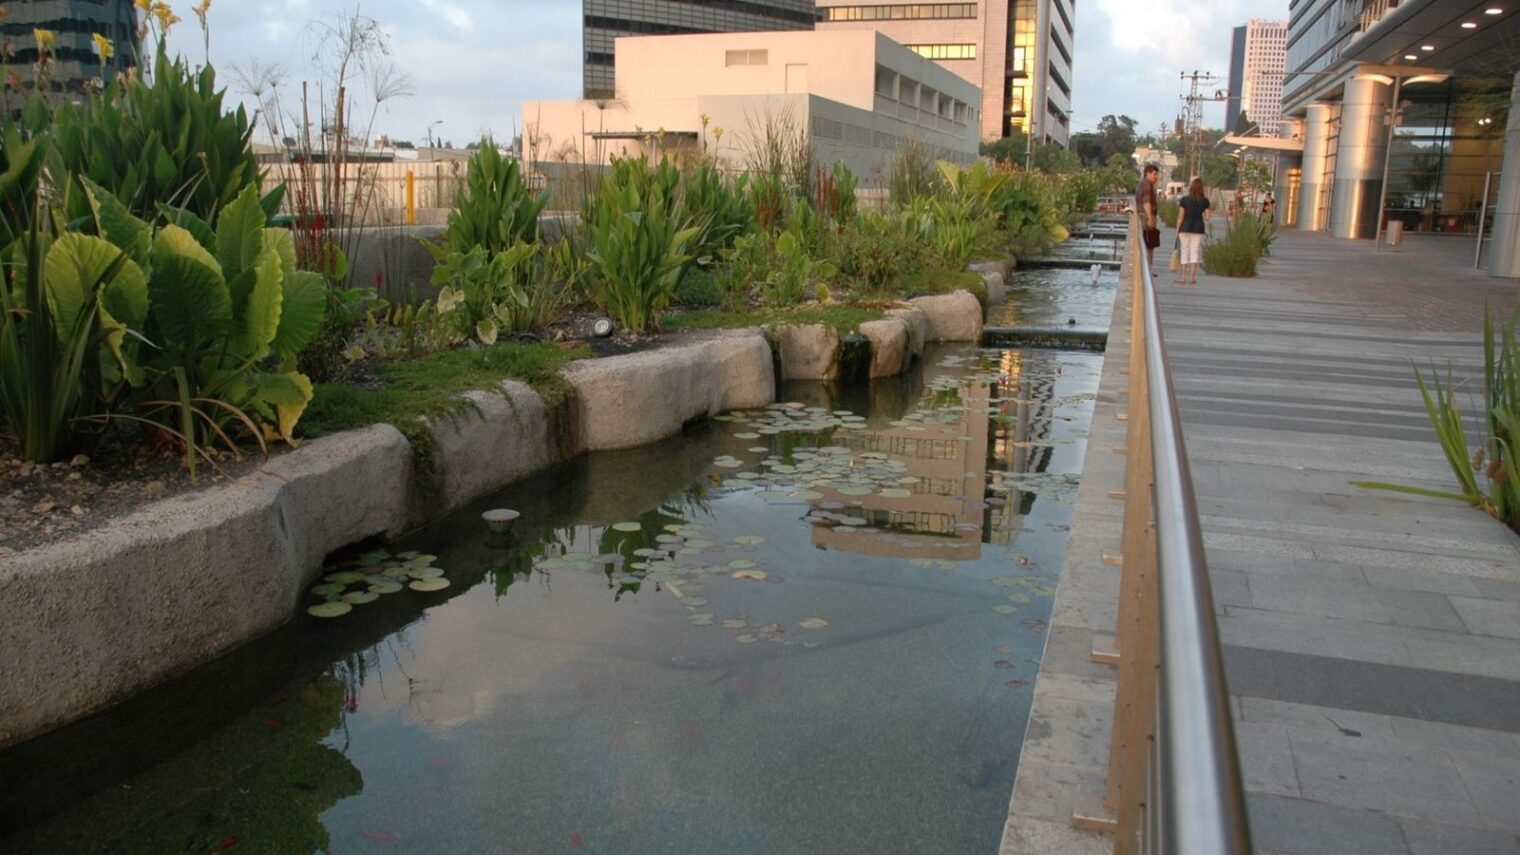 Graywater from a Tel Aviv apartment house is treated for reuse in this Ayala landscape element on the grounds. Photo: courtesy